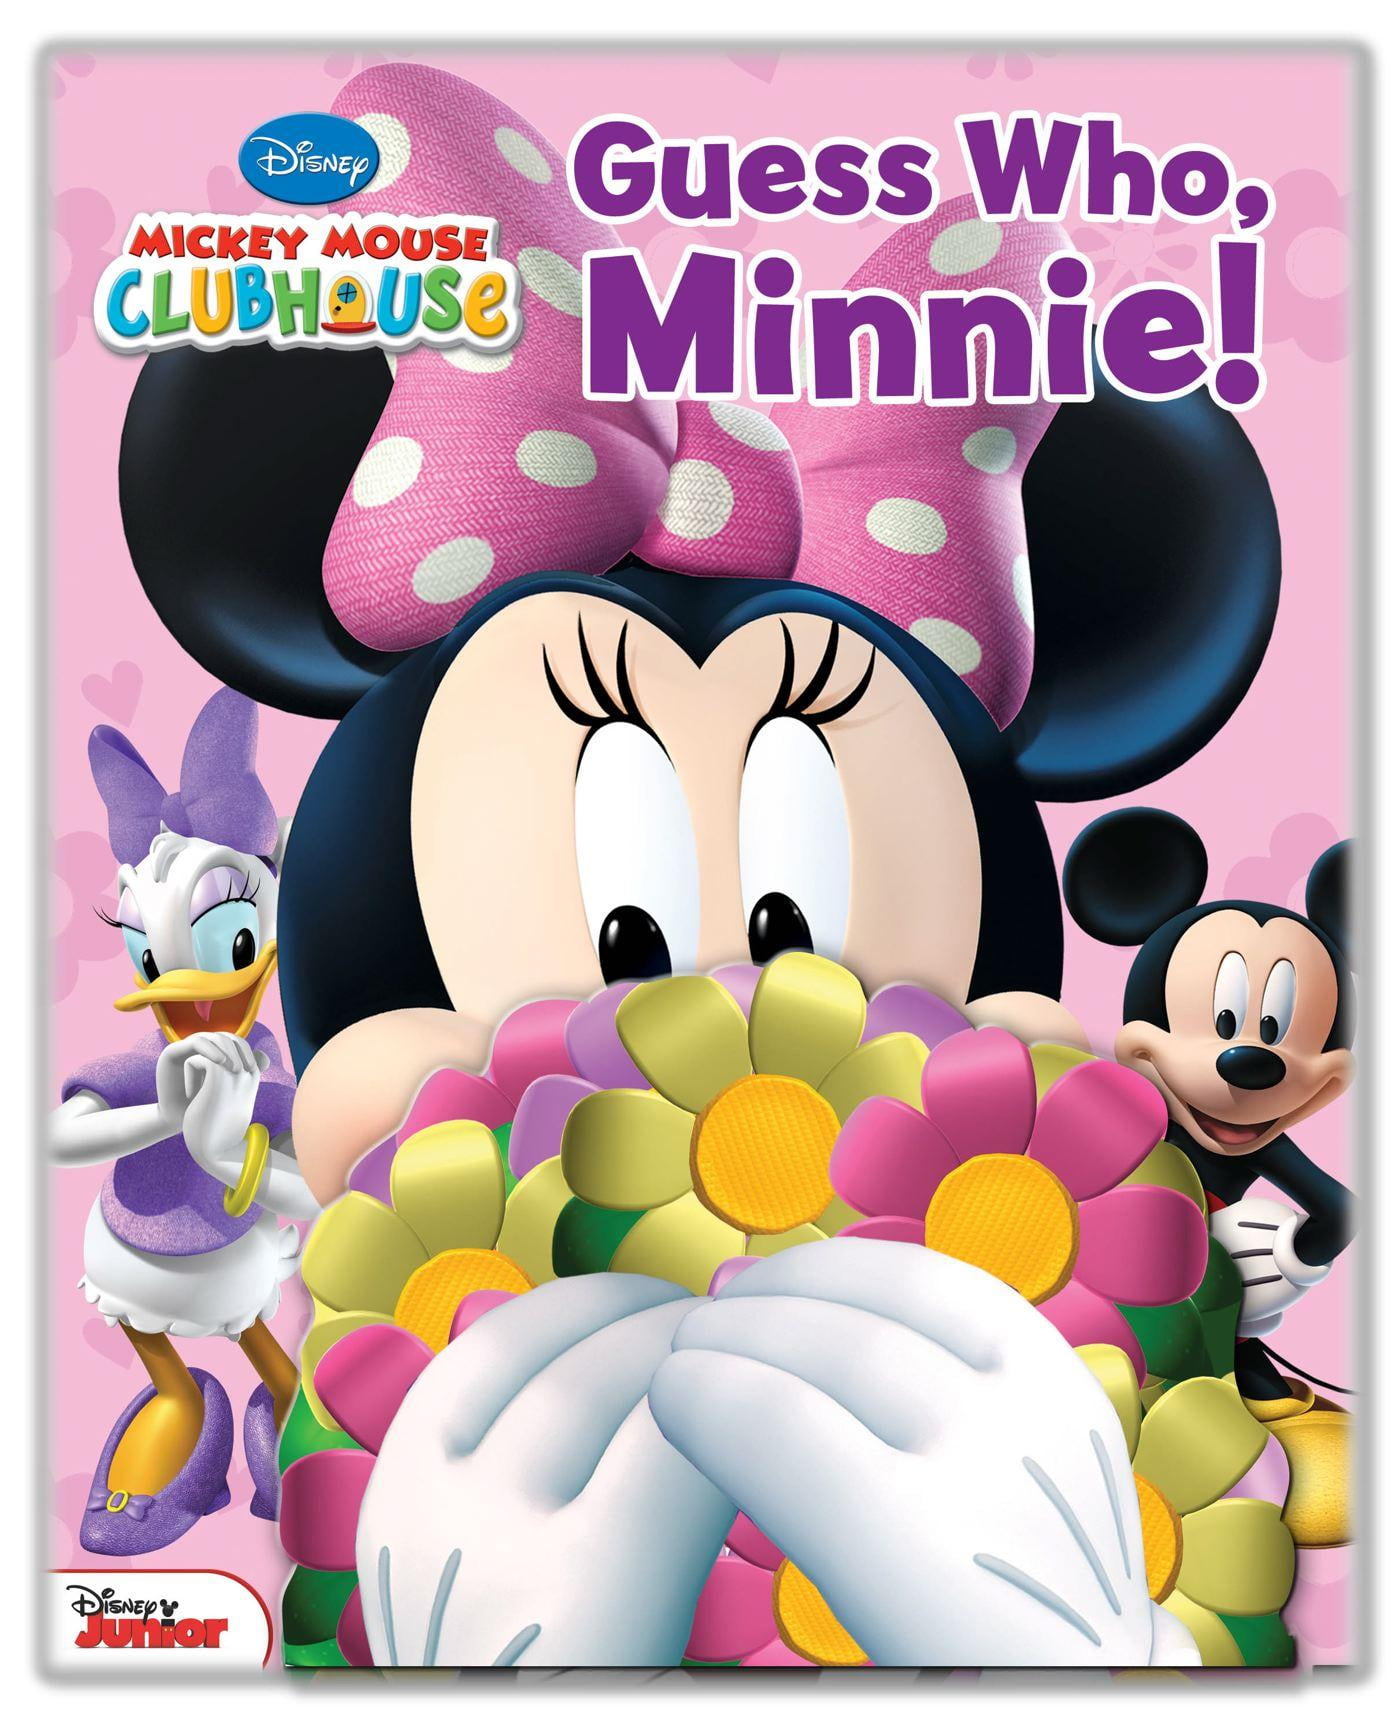 Guess Who: Disney Mickey Mouse Clubhouse: Guess Who, Minnie! (Series #1